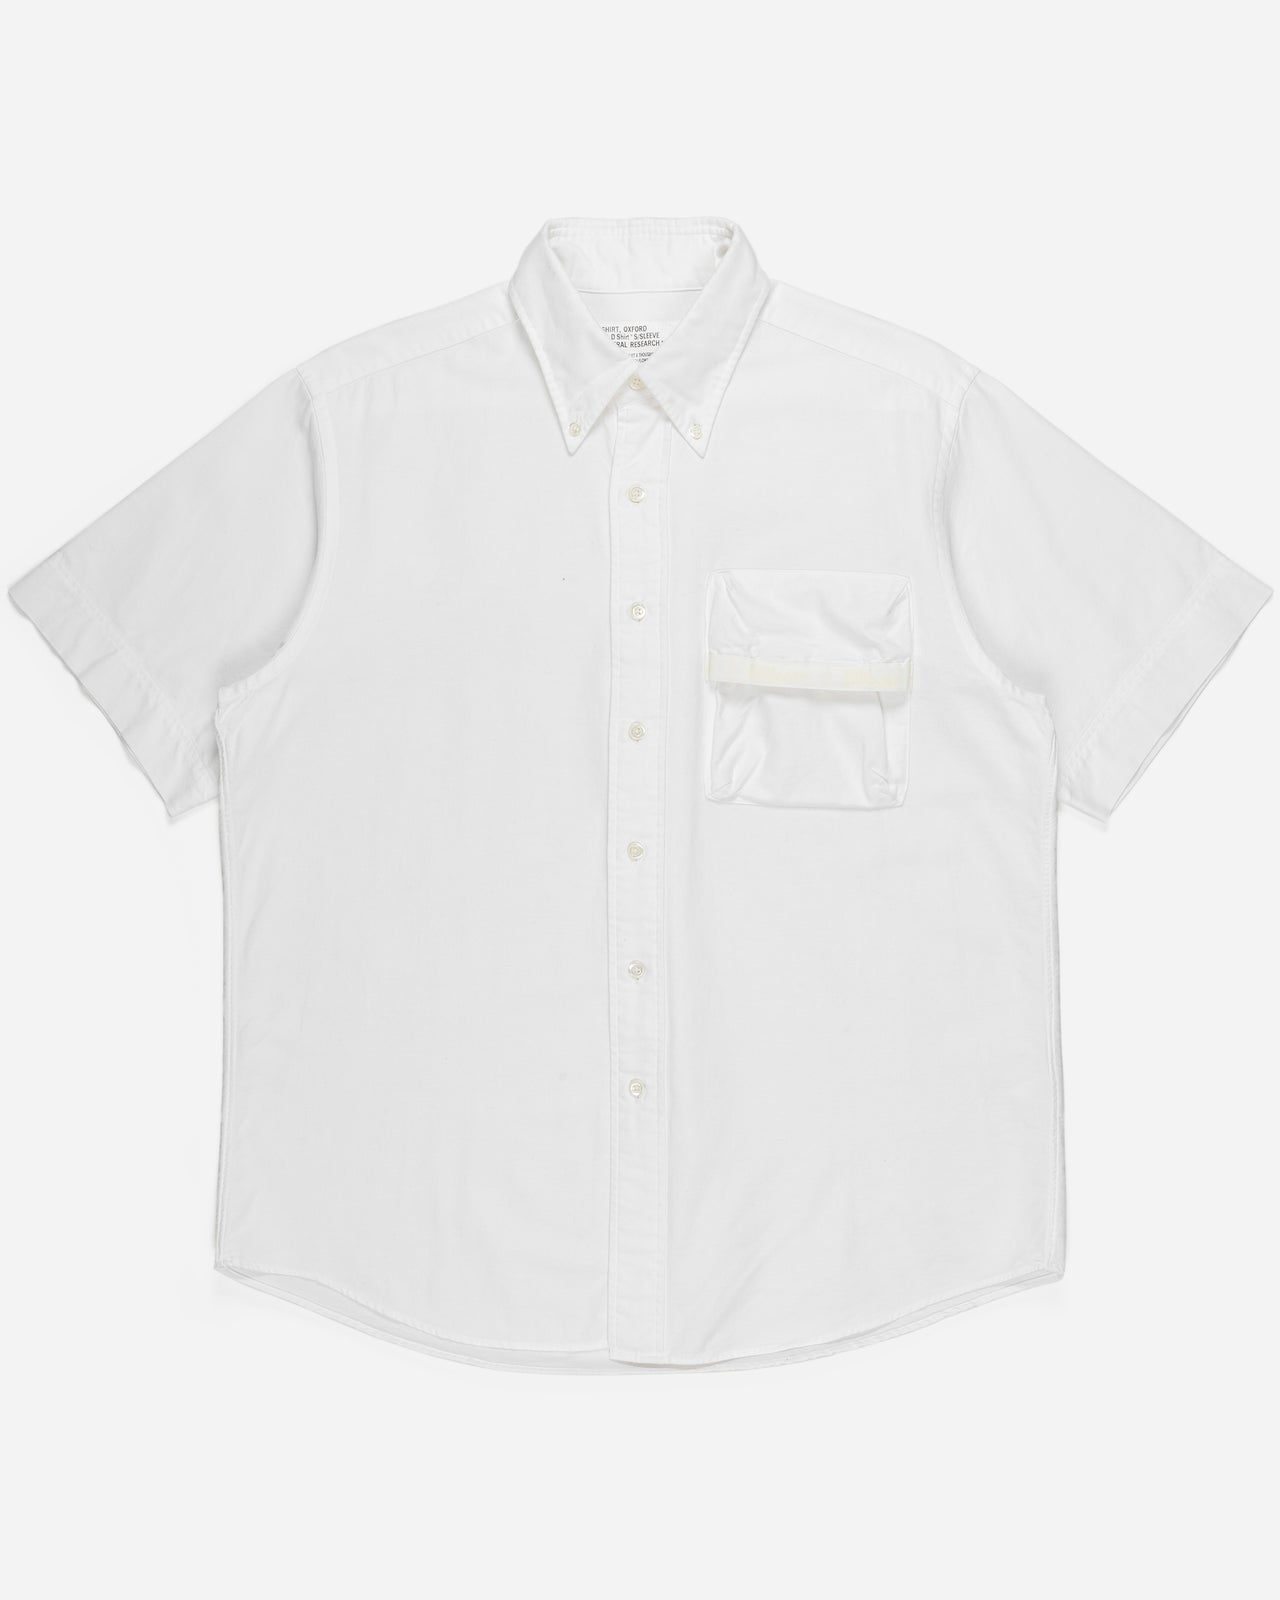 General Research Cargo Pocket Shirt "Let A Thousand Parks Bloom"